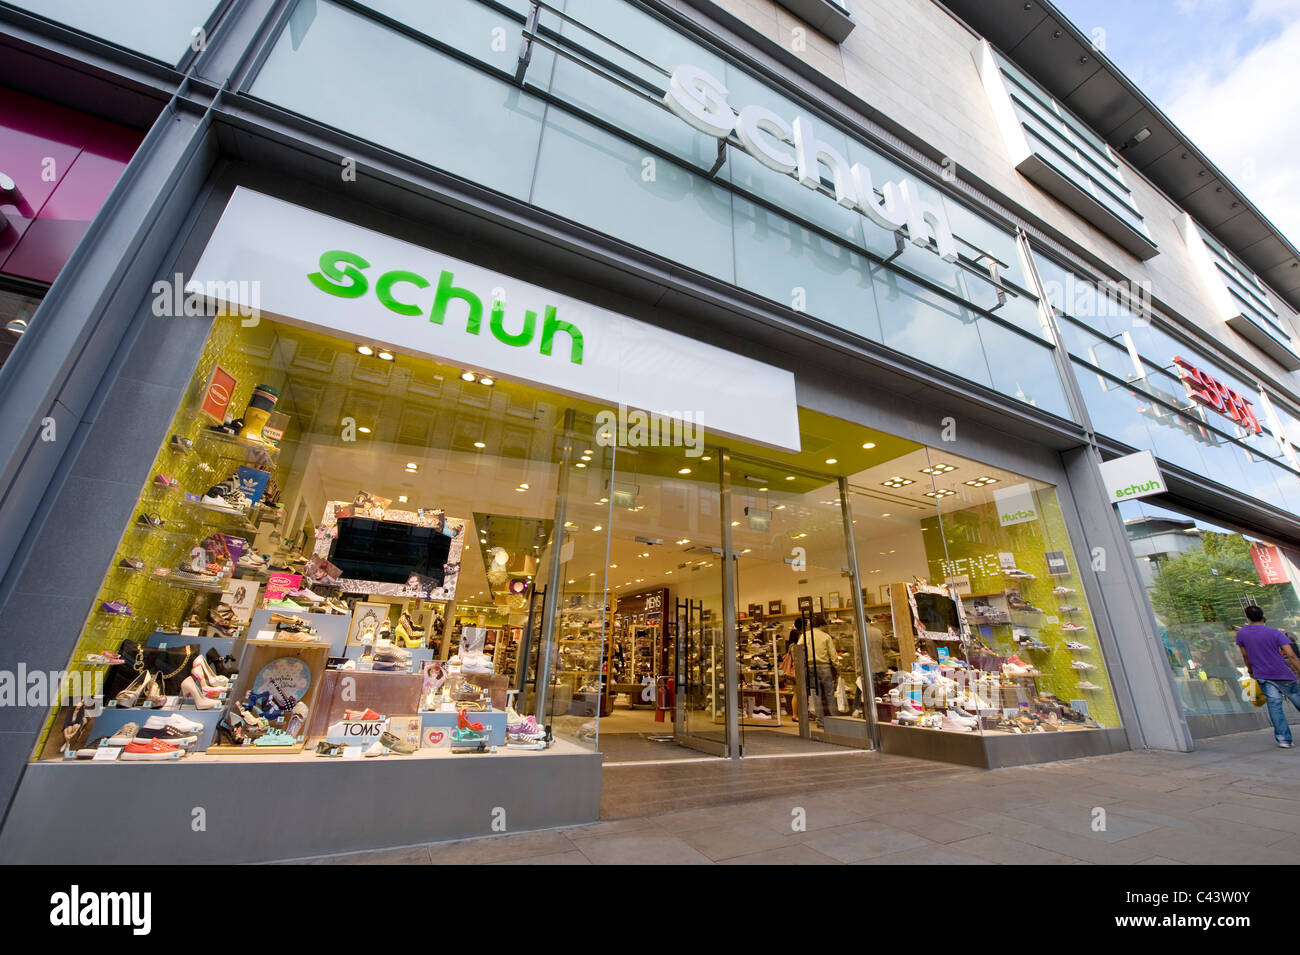 The storefront of the high street retailer Schuh on Market Street ...